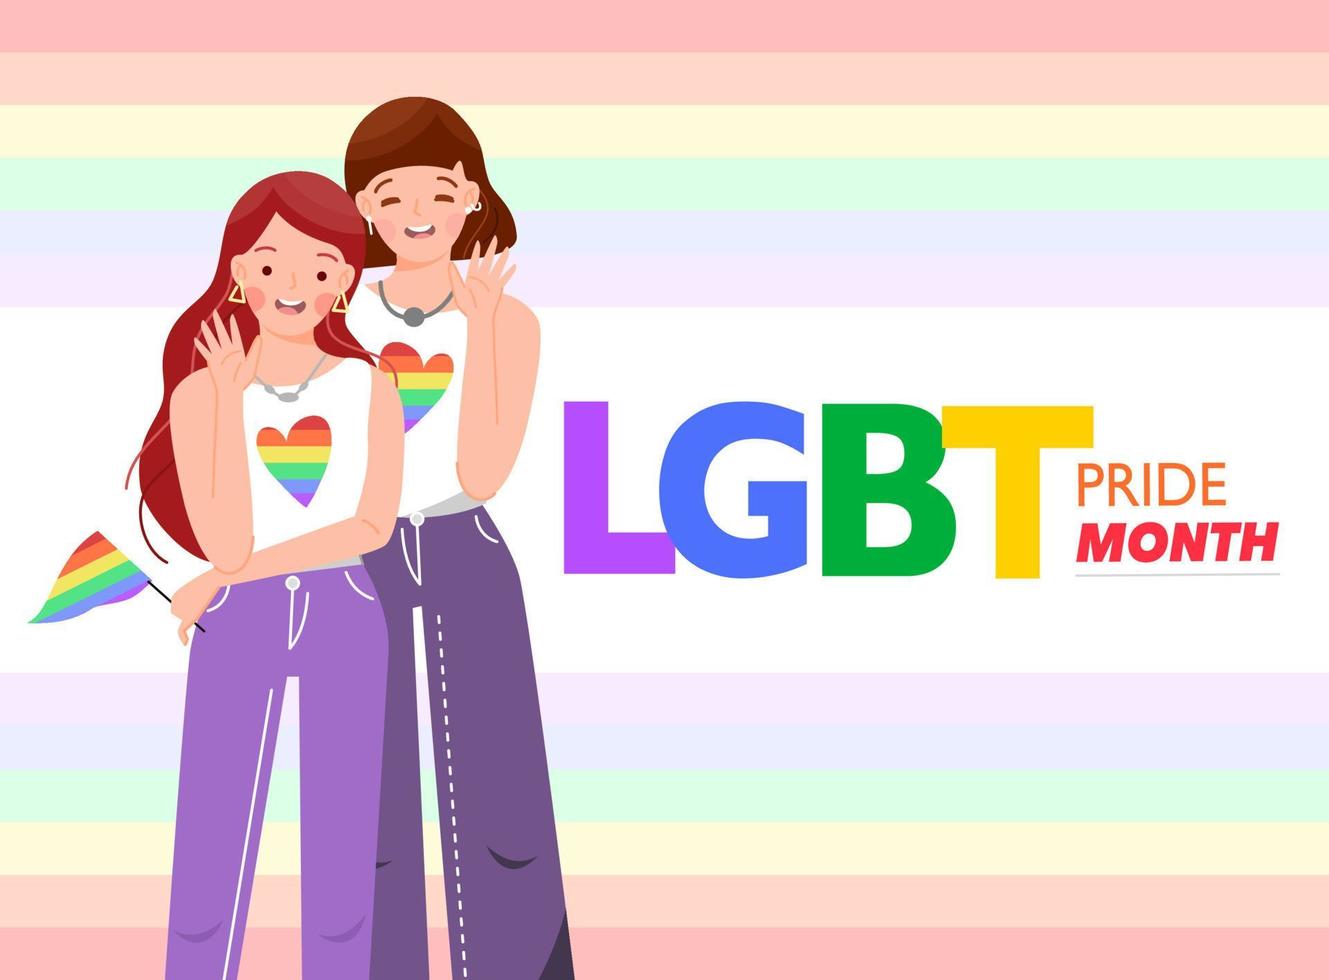 Pride month for LGBT right and social concept for poster or card. Lesbian couple, girl holding rainbow flag symbol, stading beside woman. Gay bisexual transgender community. Flat vector illustration